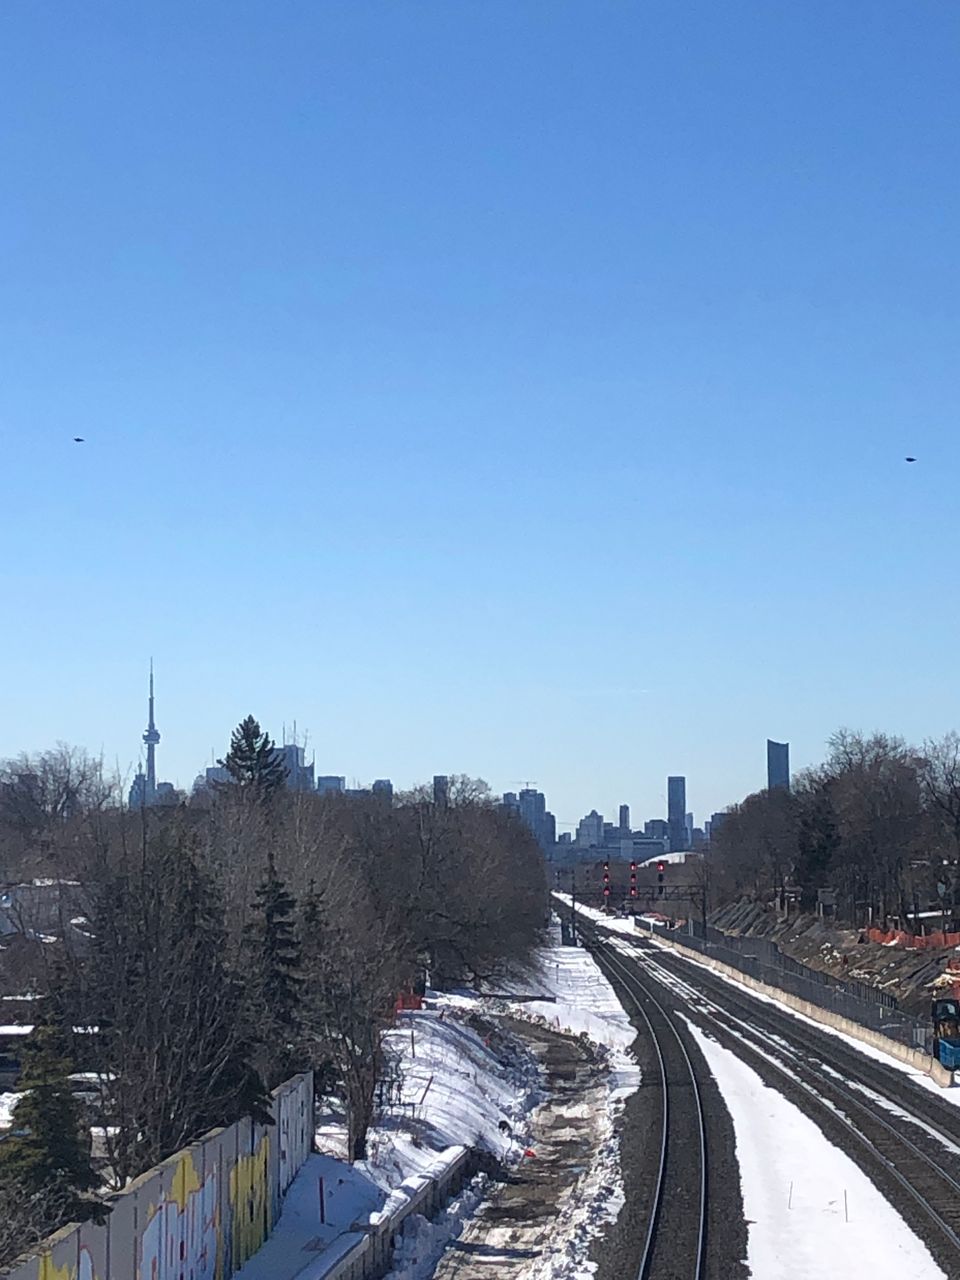 Snowy train tracks flanked by trees under a blue sky, with the city of Toronto silhouetted in the distance.